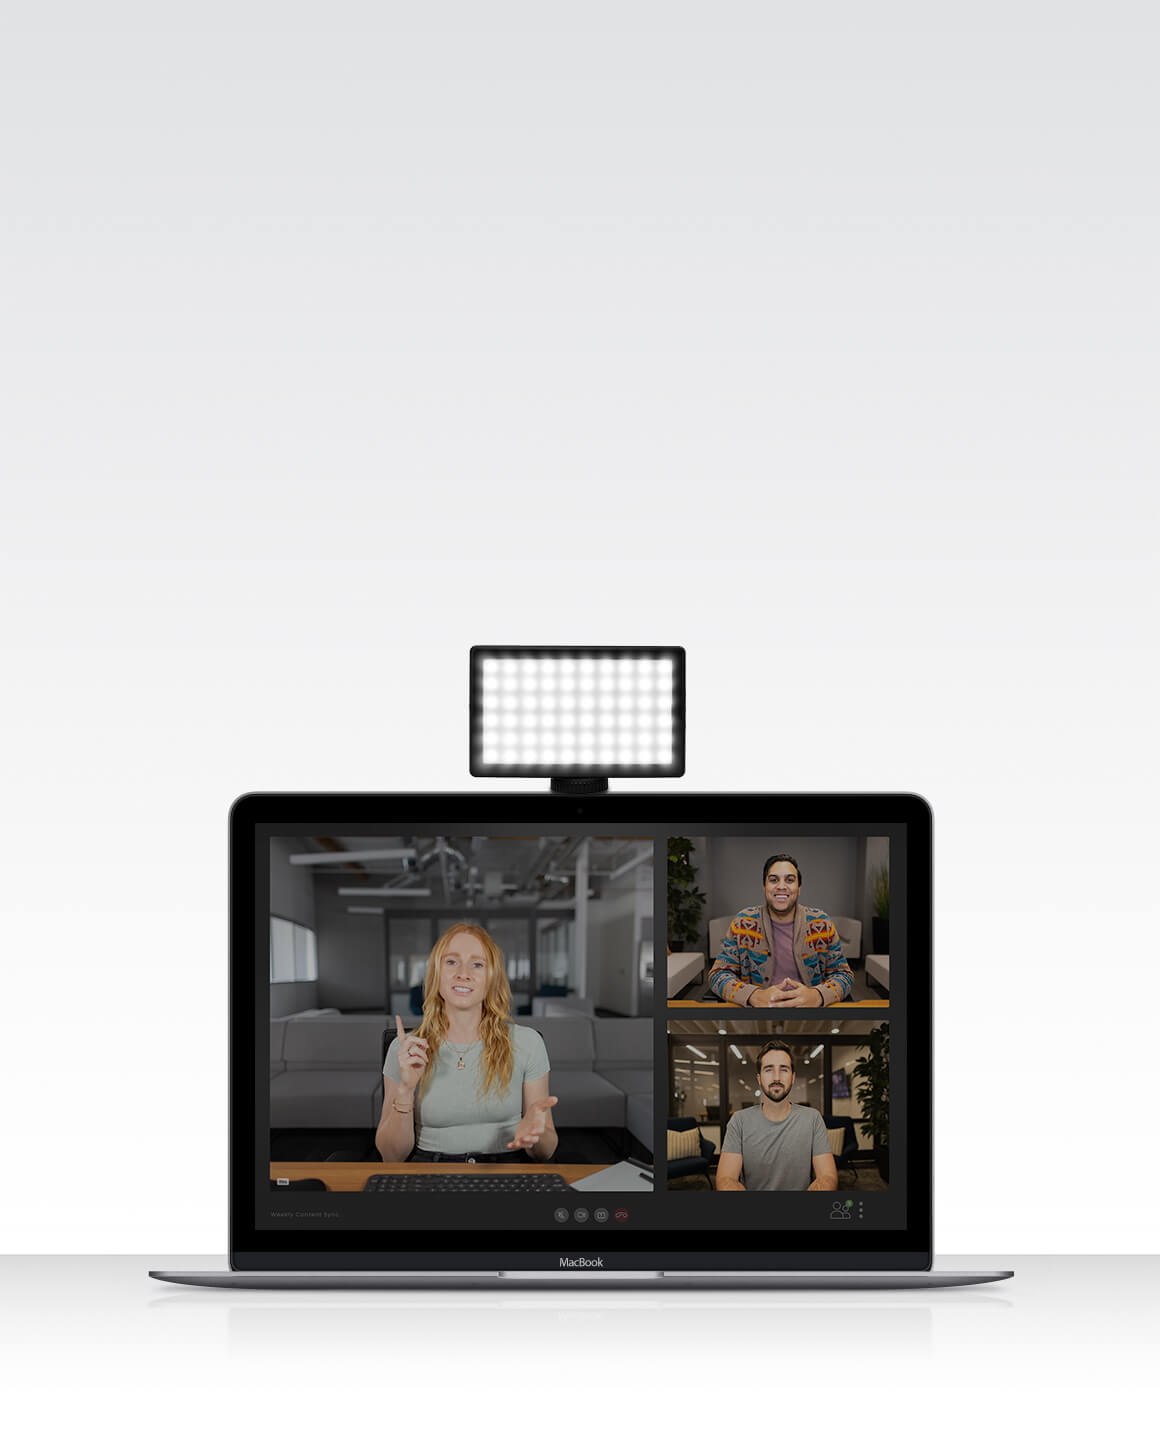 Lume Cube Video Conference Lighting Kit, which includes the Panel Mini LED and the Suction Cup Mount, mounted on a laptop.